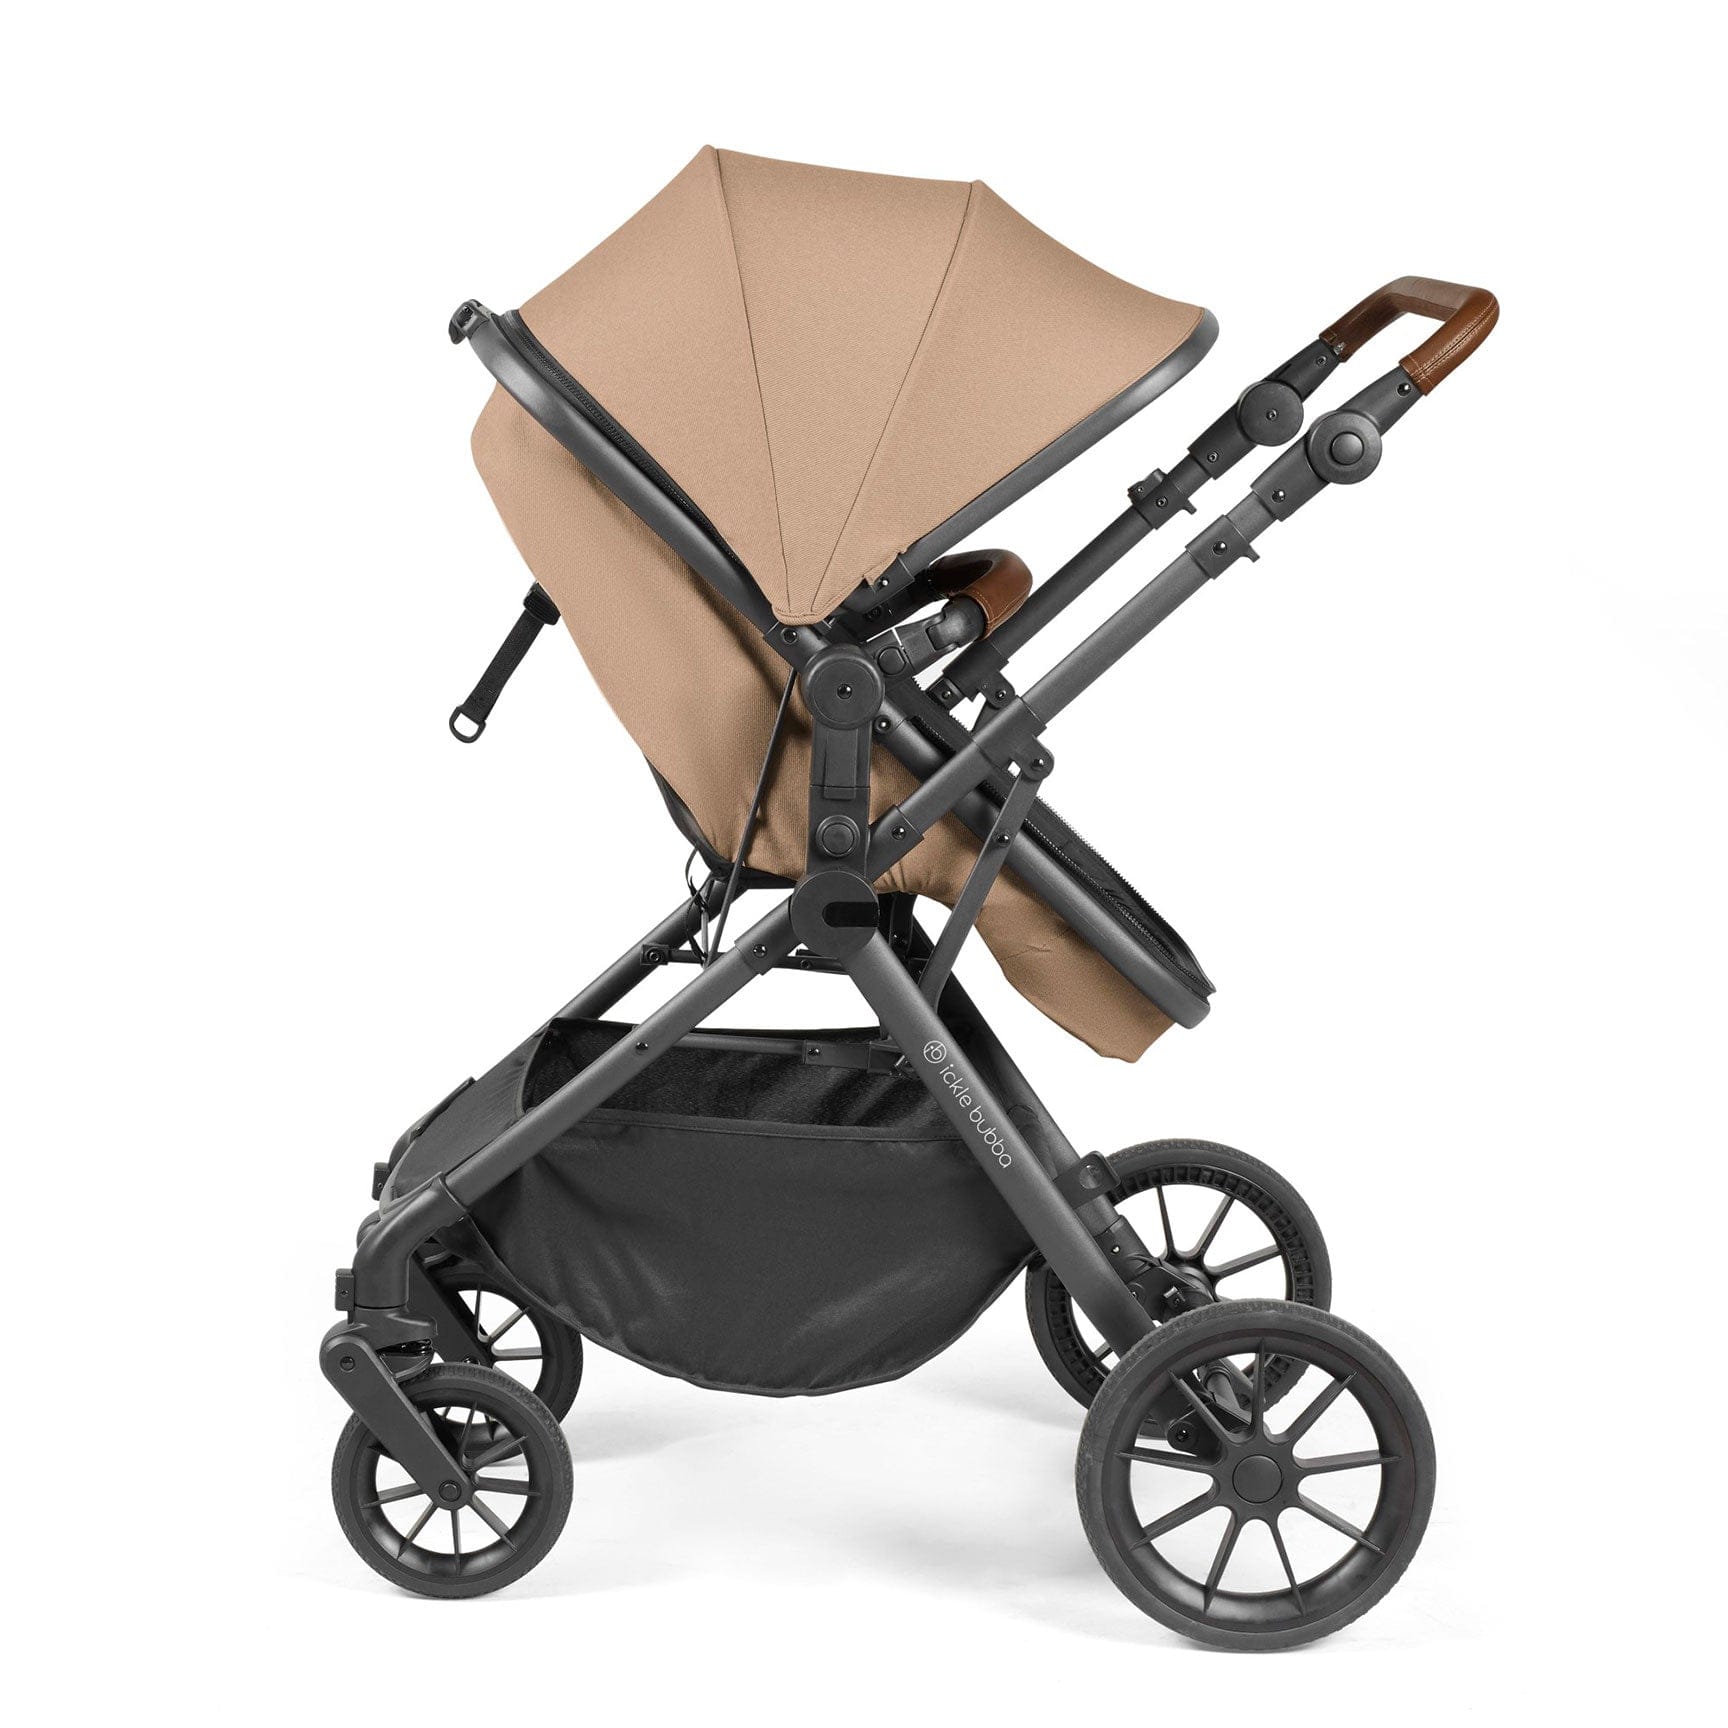 Ickle Bubba Cosmo All-in-One I-Size Travel System with Isofix Base in Desert/Gun Metal Travel Systems 10-007-300-136 5056515025859